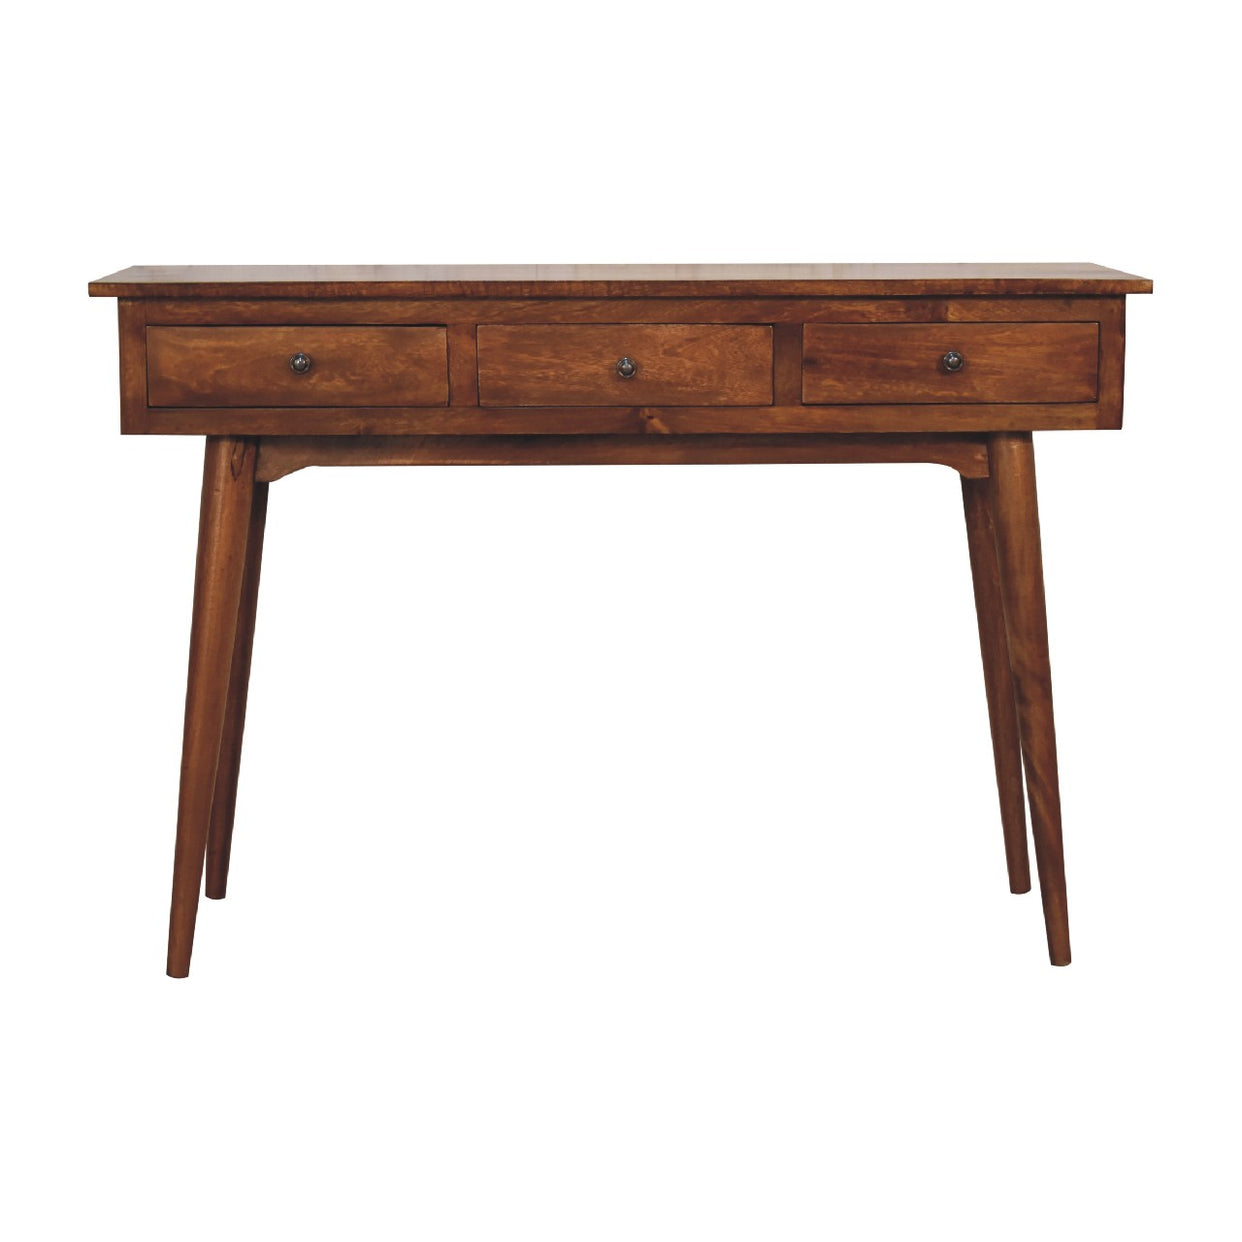 3 Drawer Chestnut Large Mango Wood Console Table from Artisan Furniture - IN3345